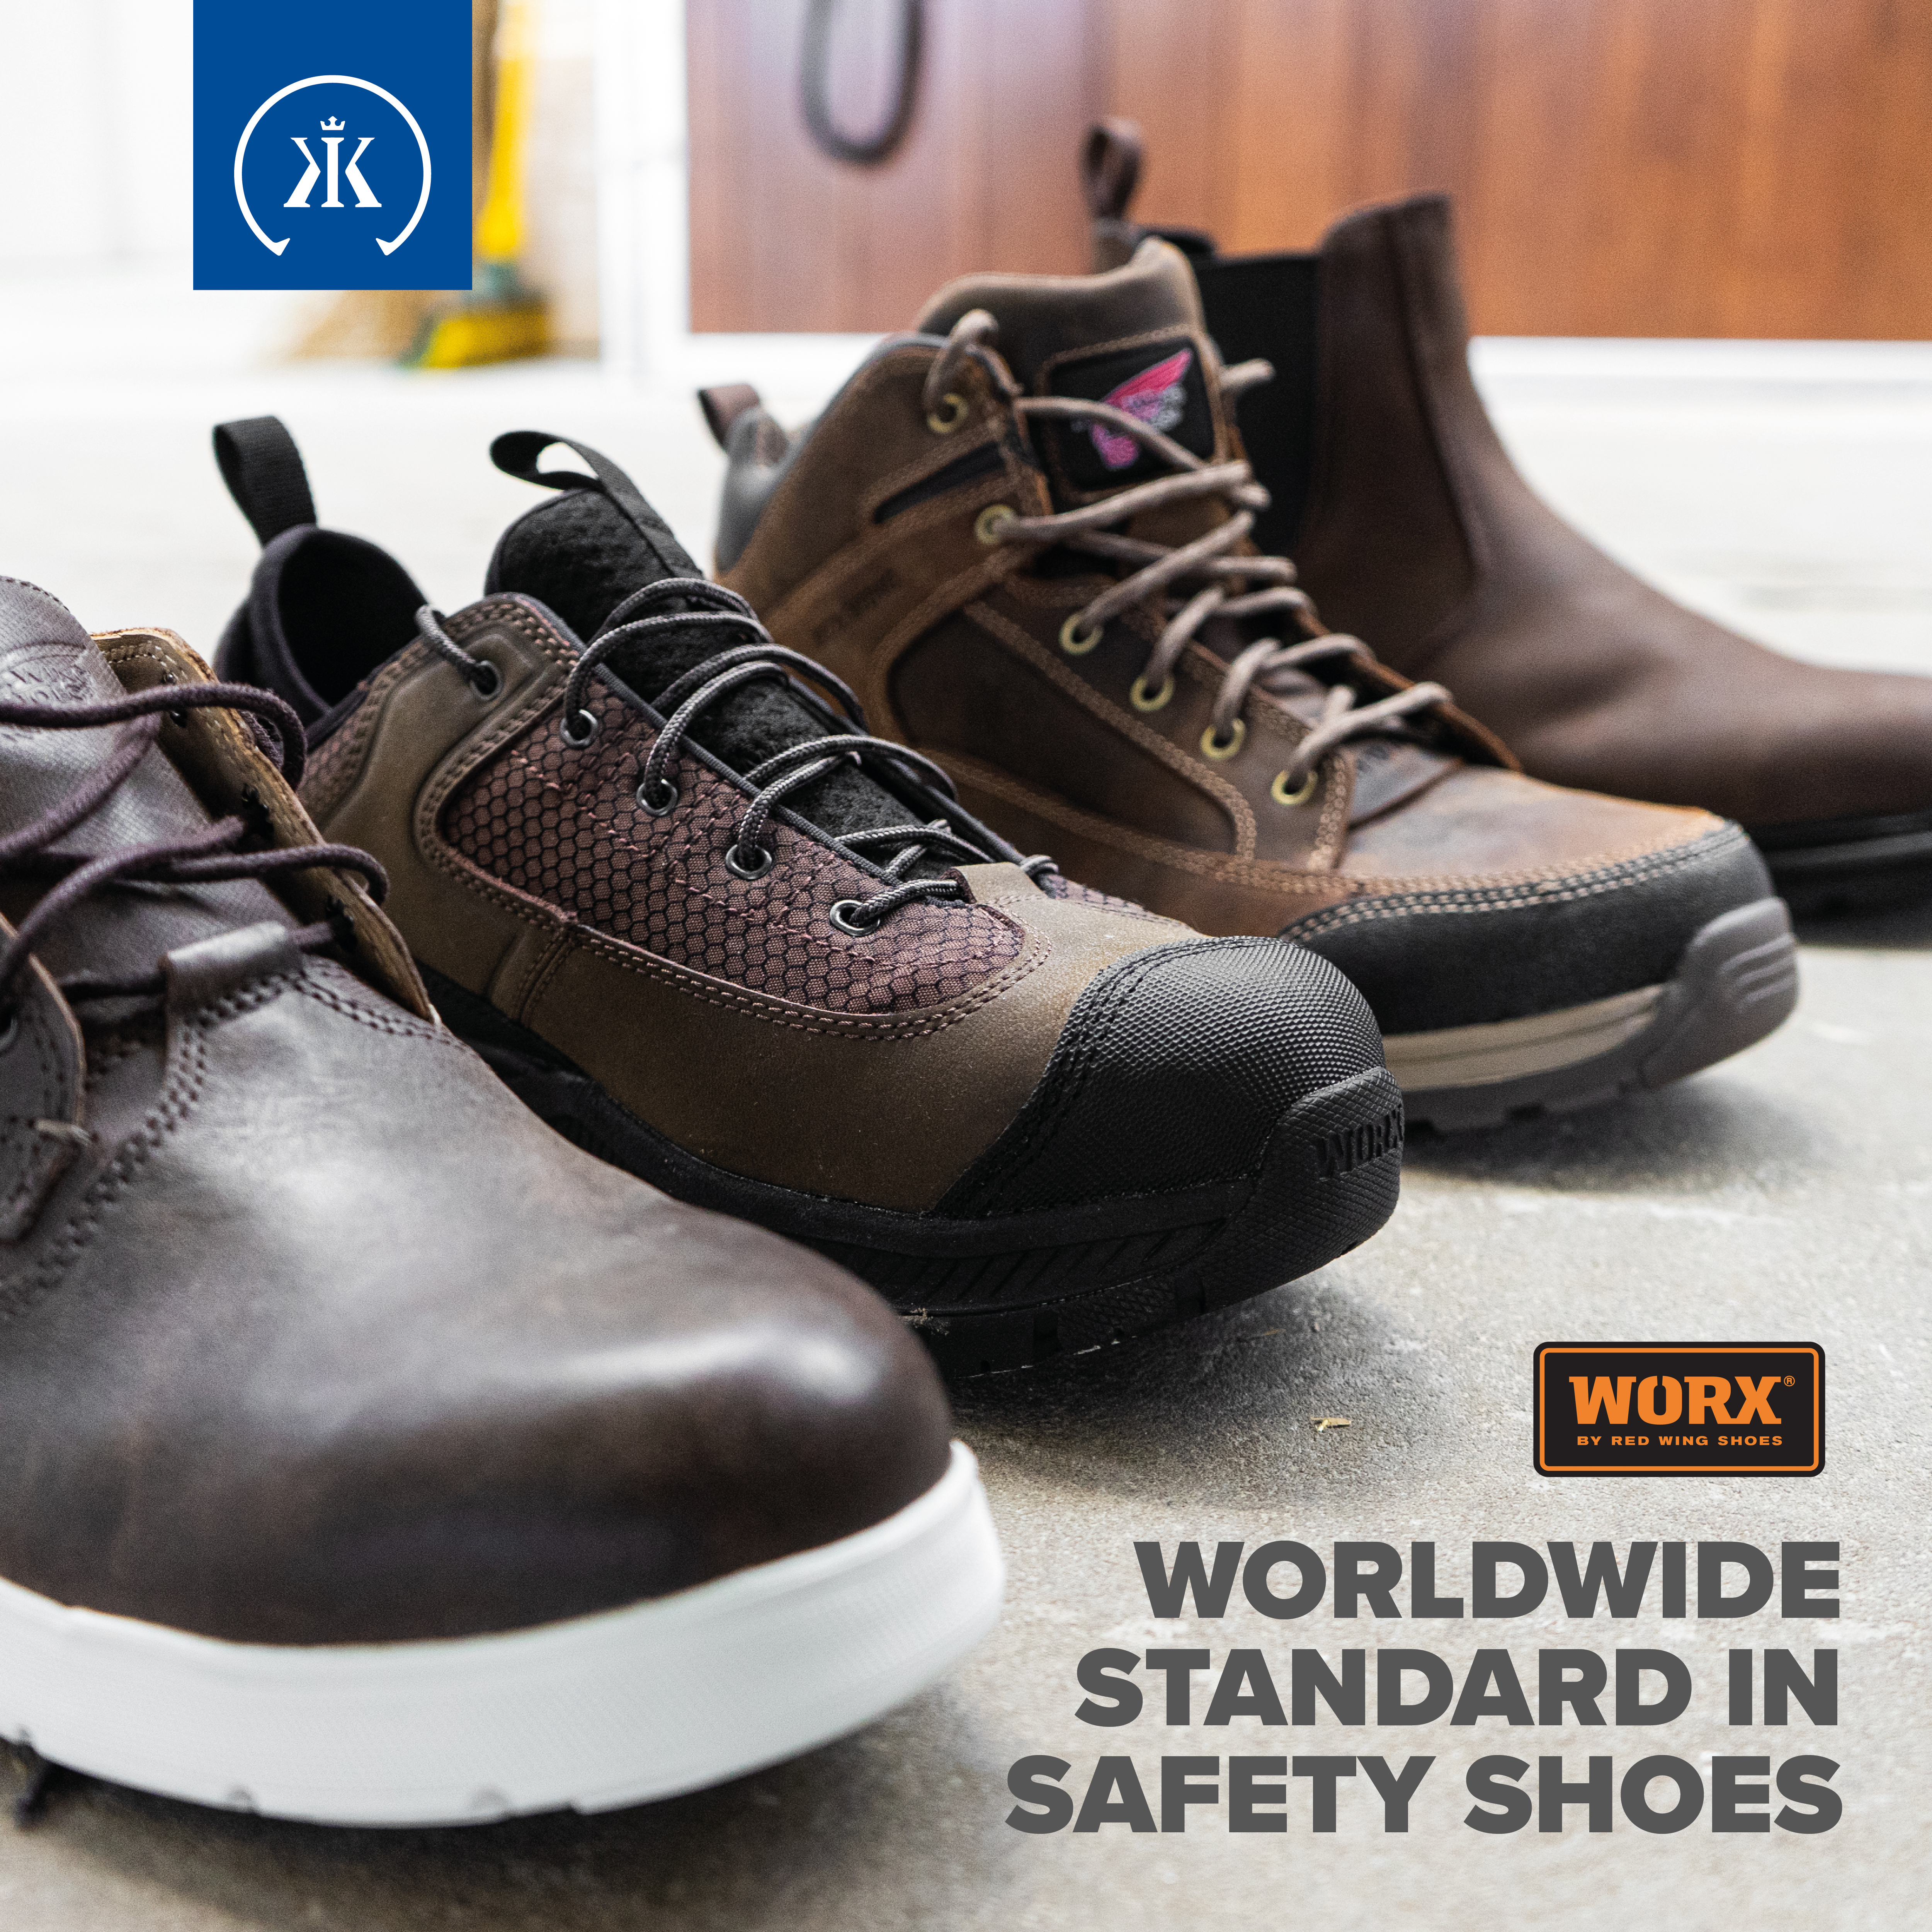 Radwing Worx safety shoe collection